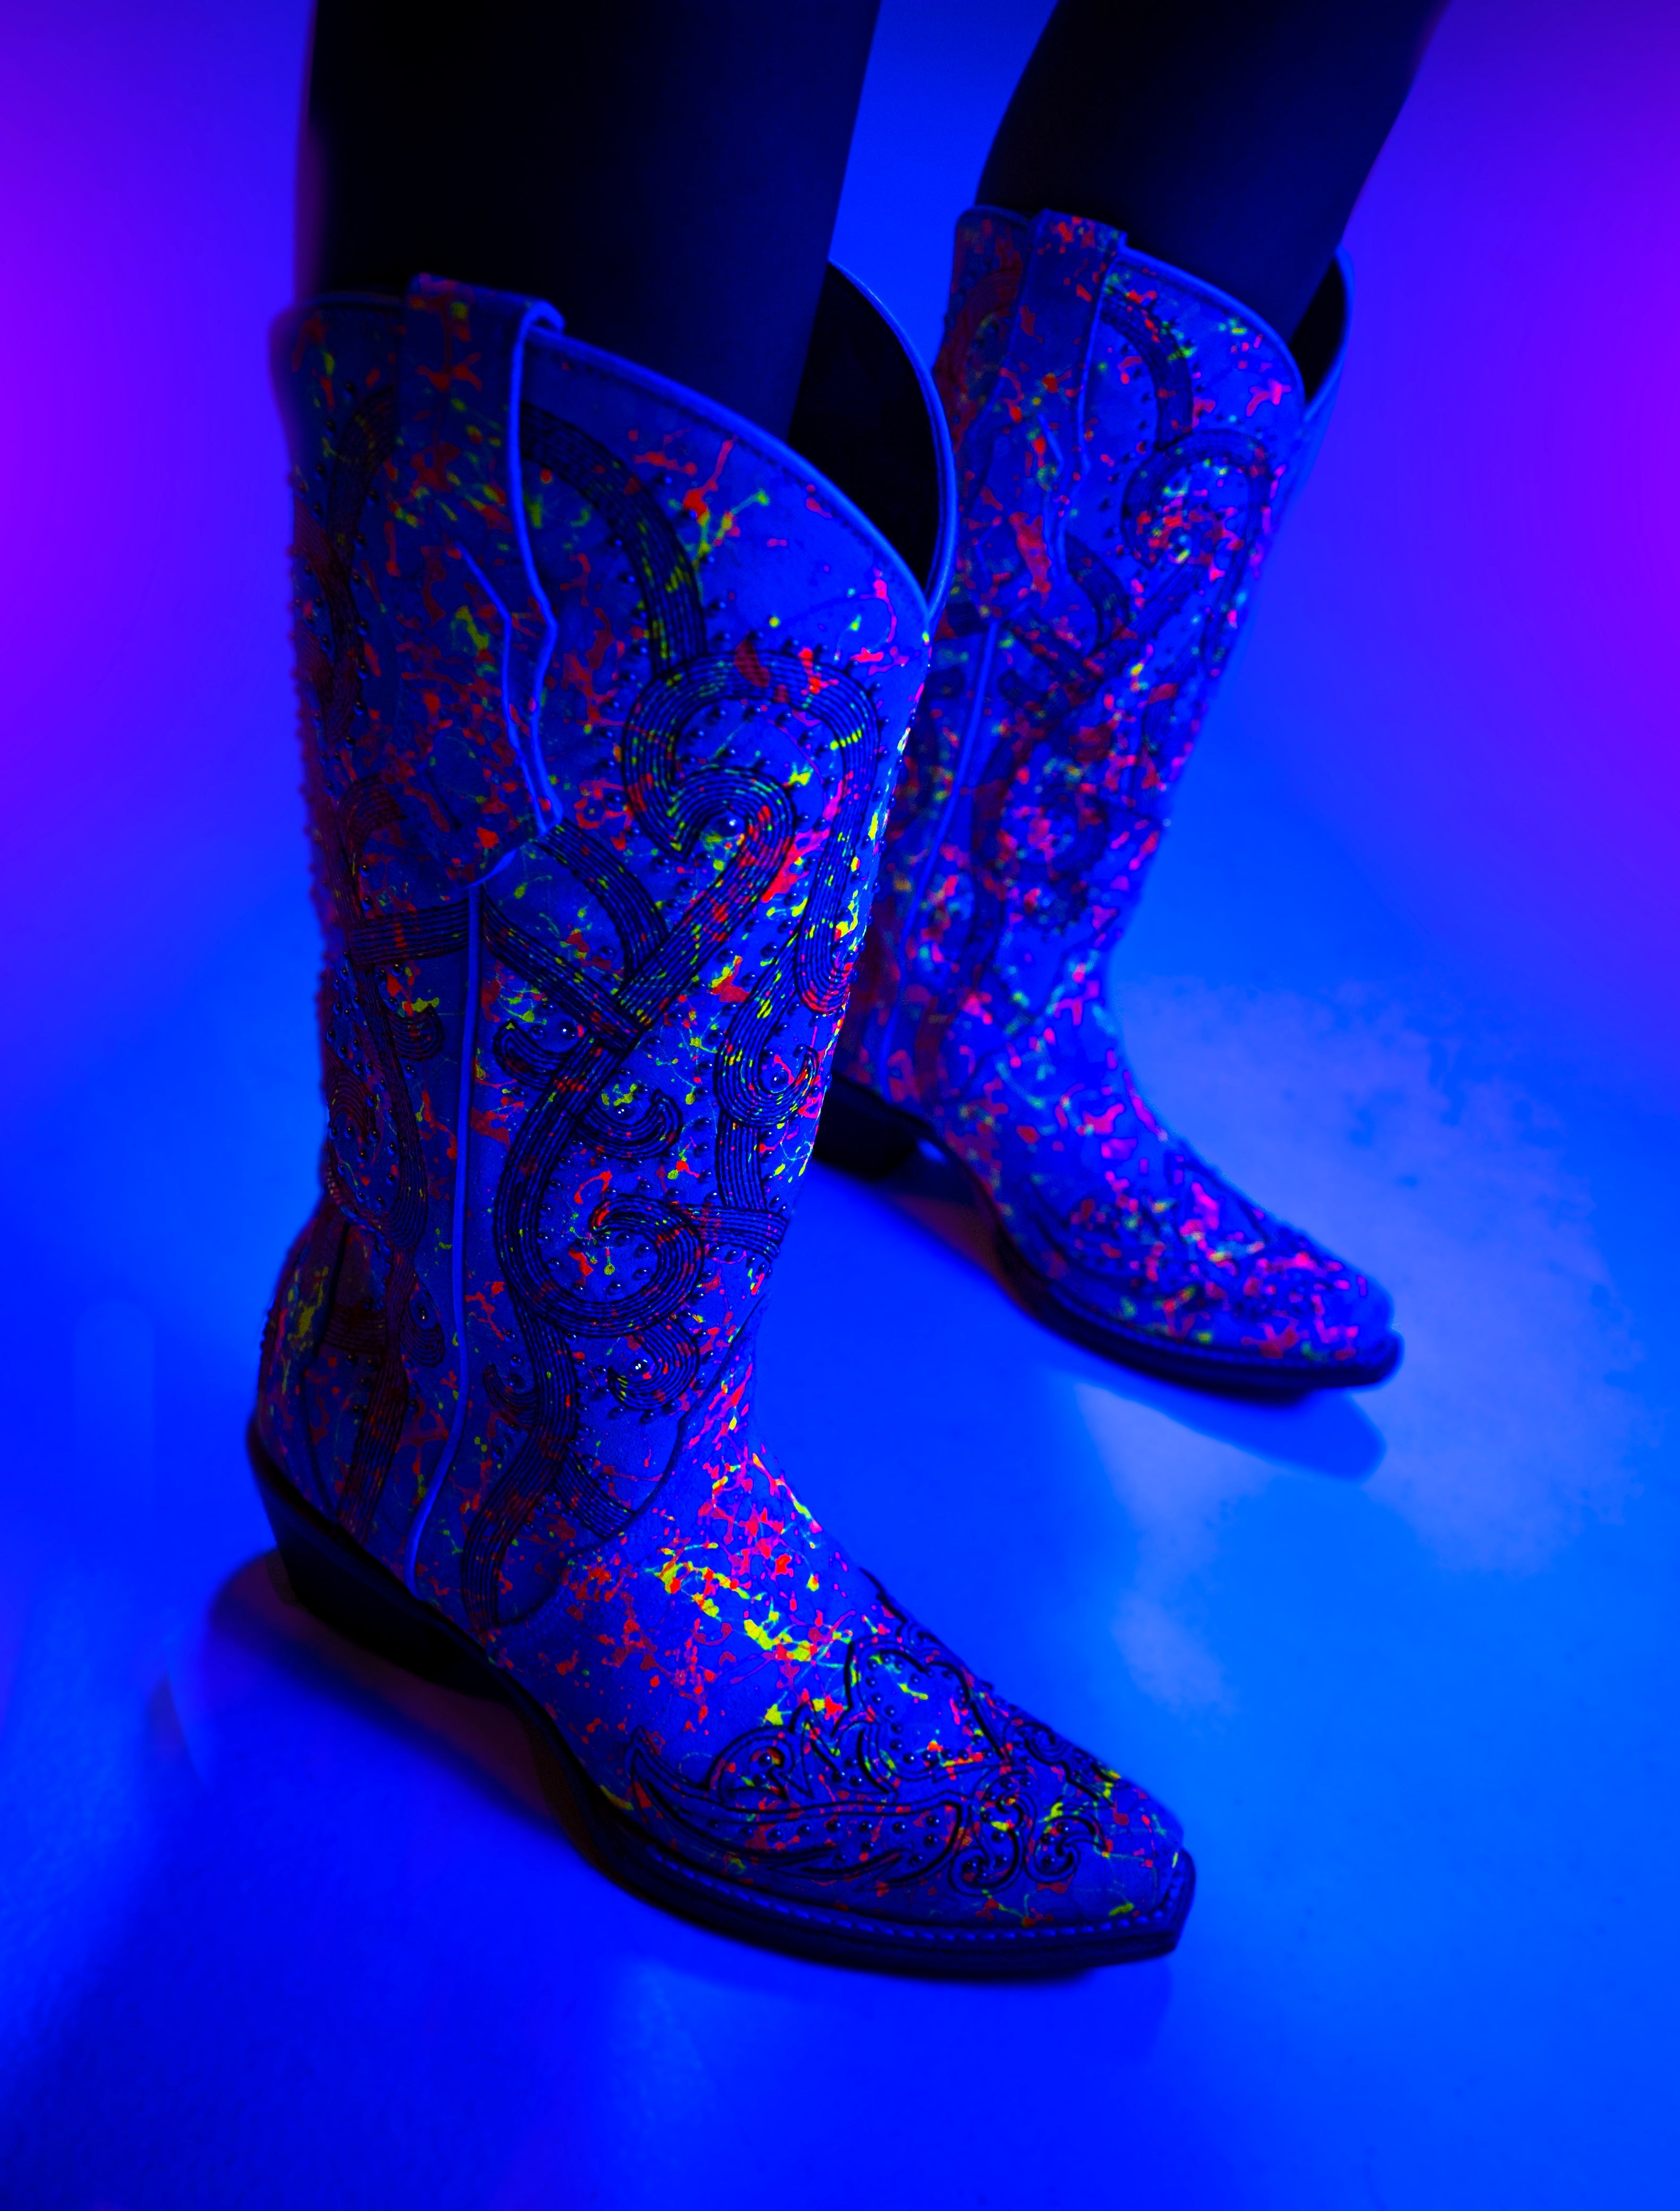 Multicolor Neon Overlay & Embroidery Boots by Corral